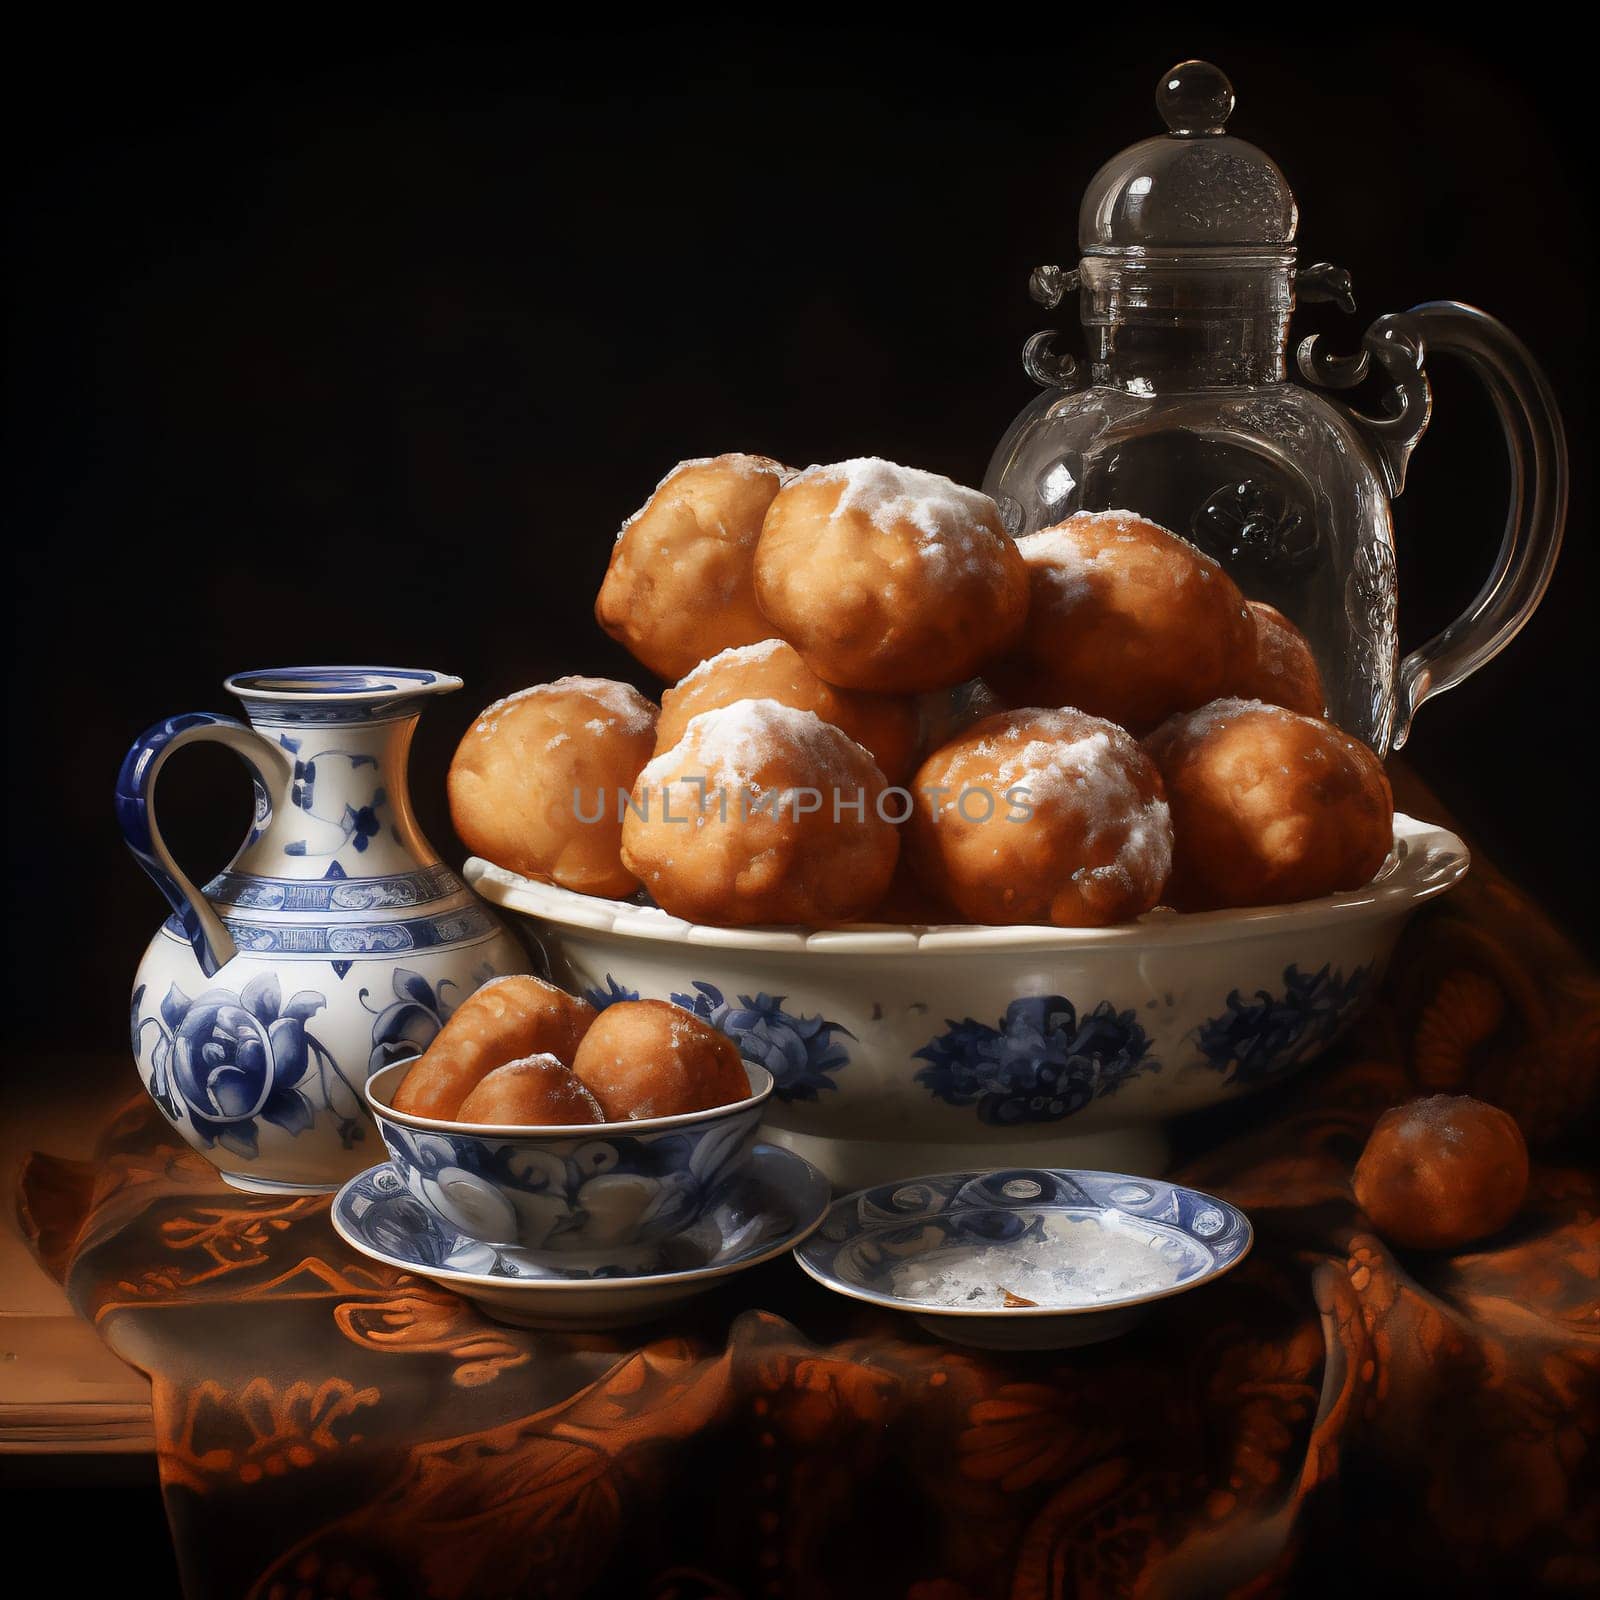 'Oliebollen', traditional Dutch pastry for New Year's Eve in the Netherlands